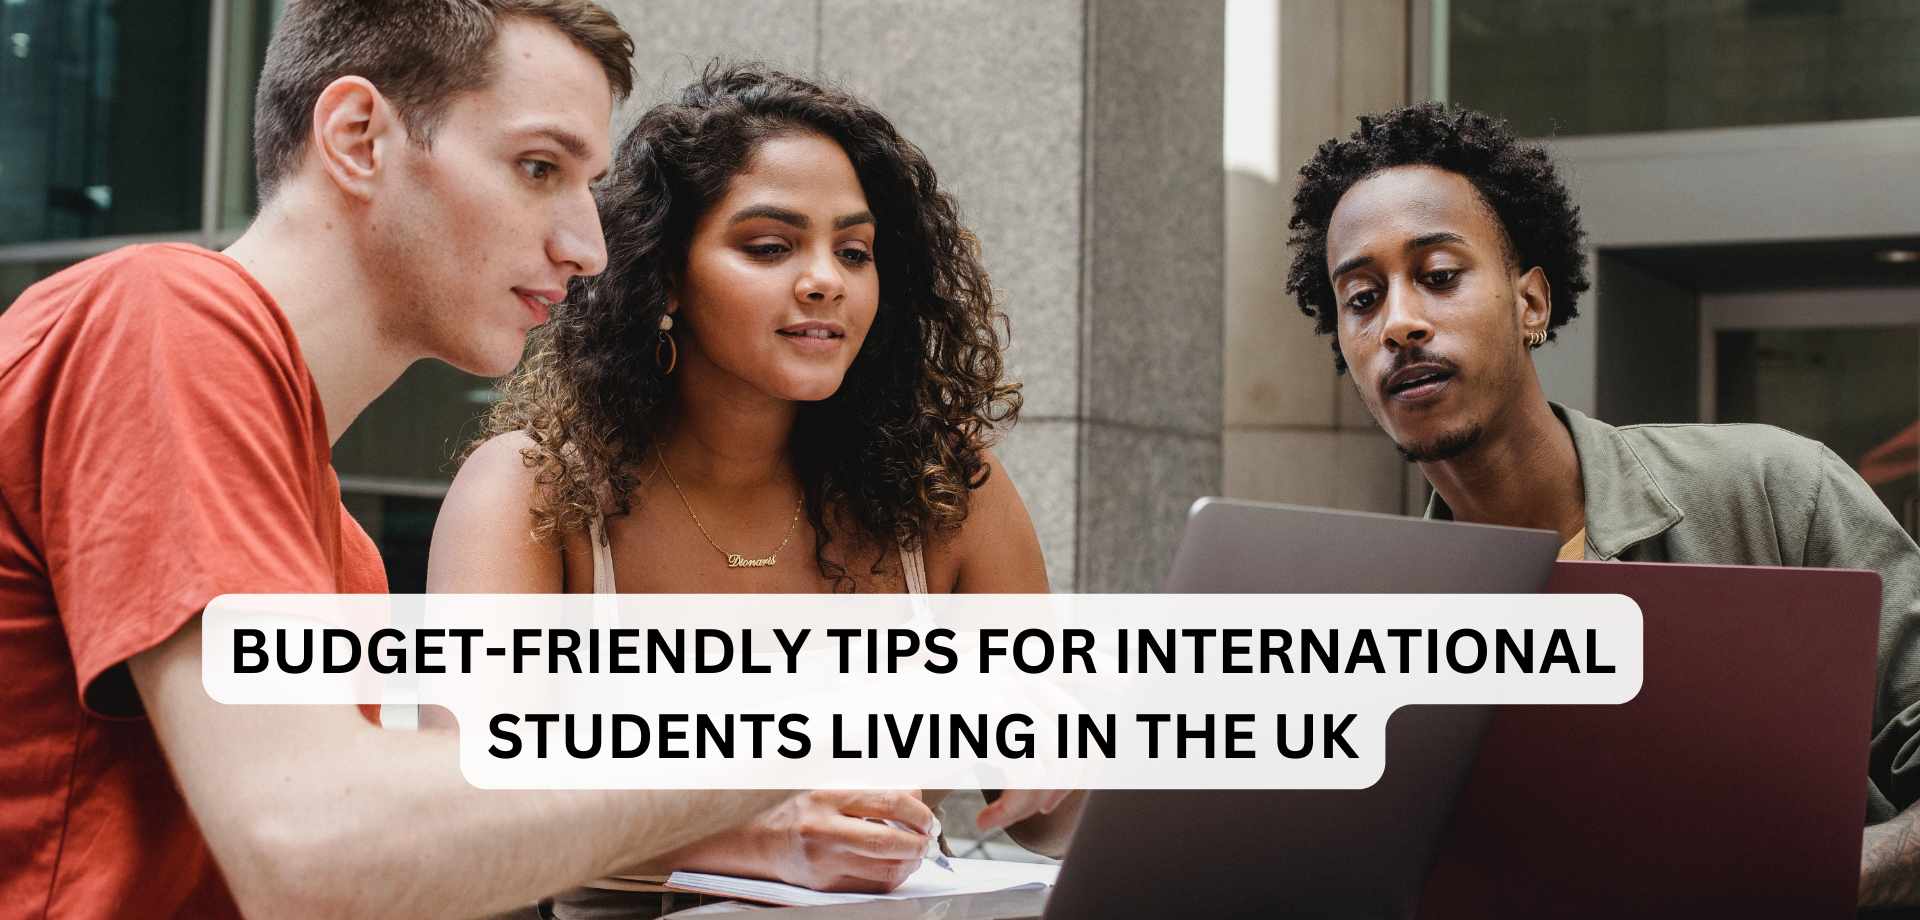 Budget-Friendly Tips for International Students Living in the UK